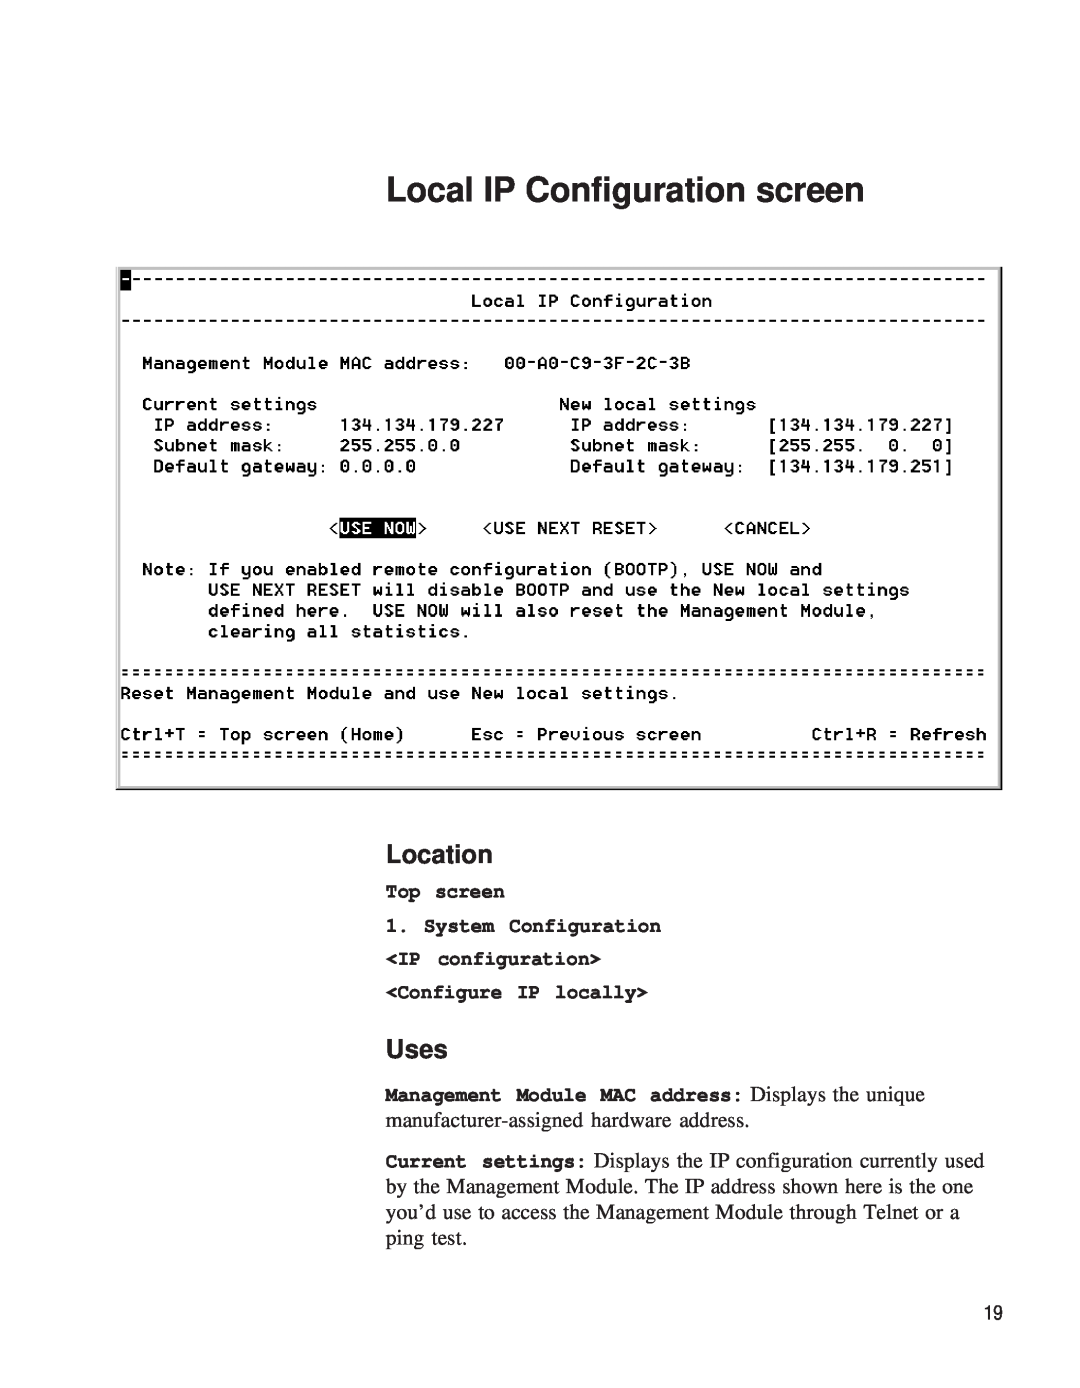 Intel EE110MM manual Local IP Configuration screen, Top screen, Location, Uses 